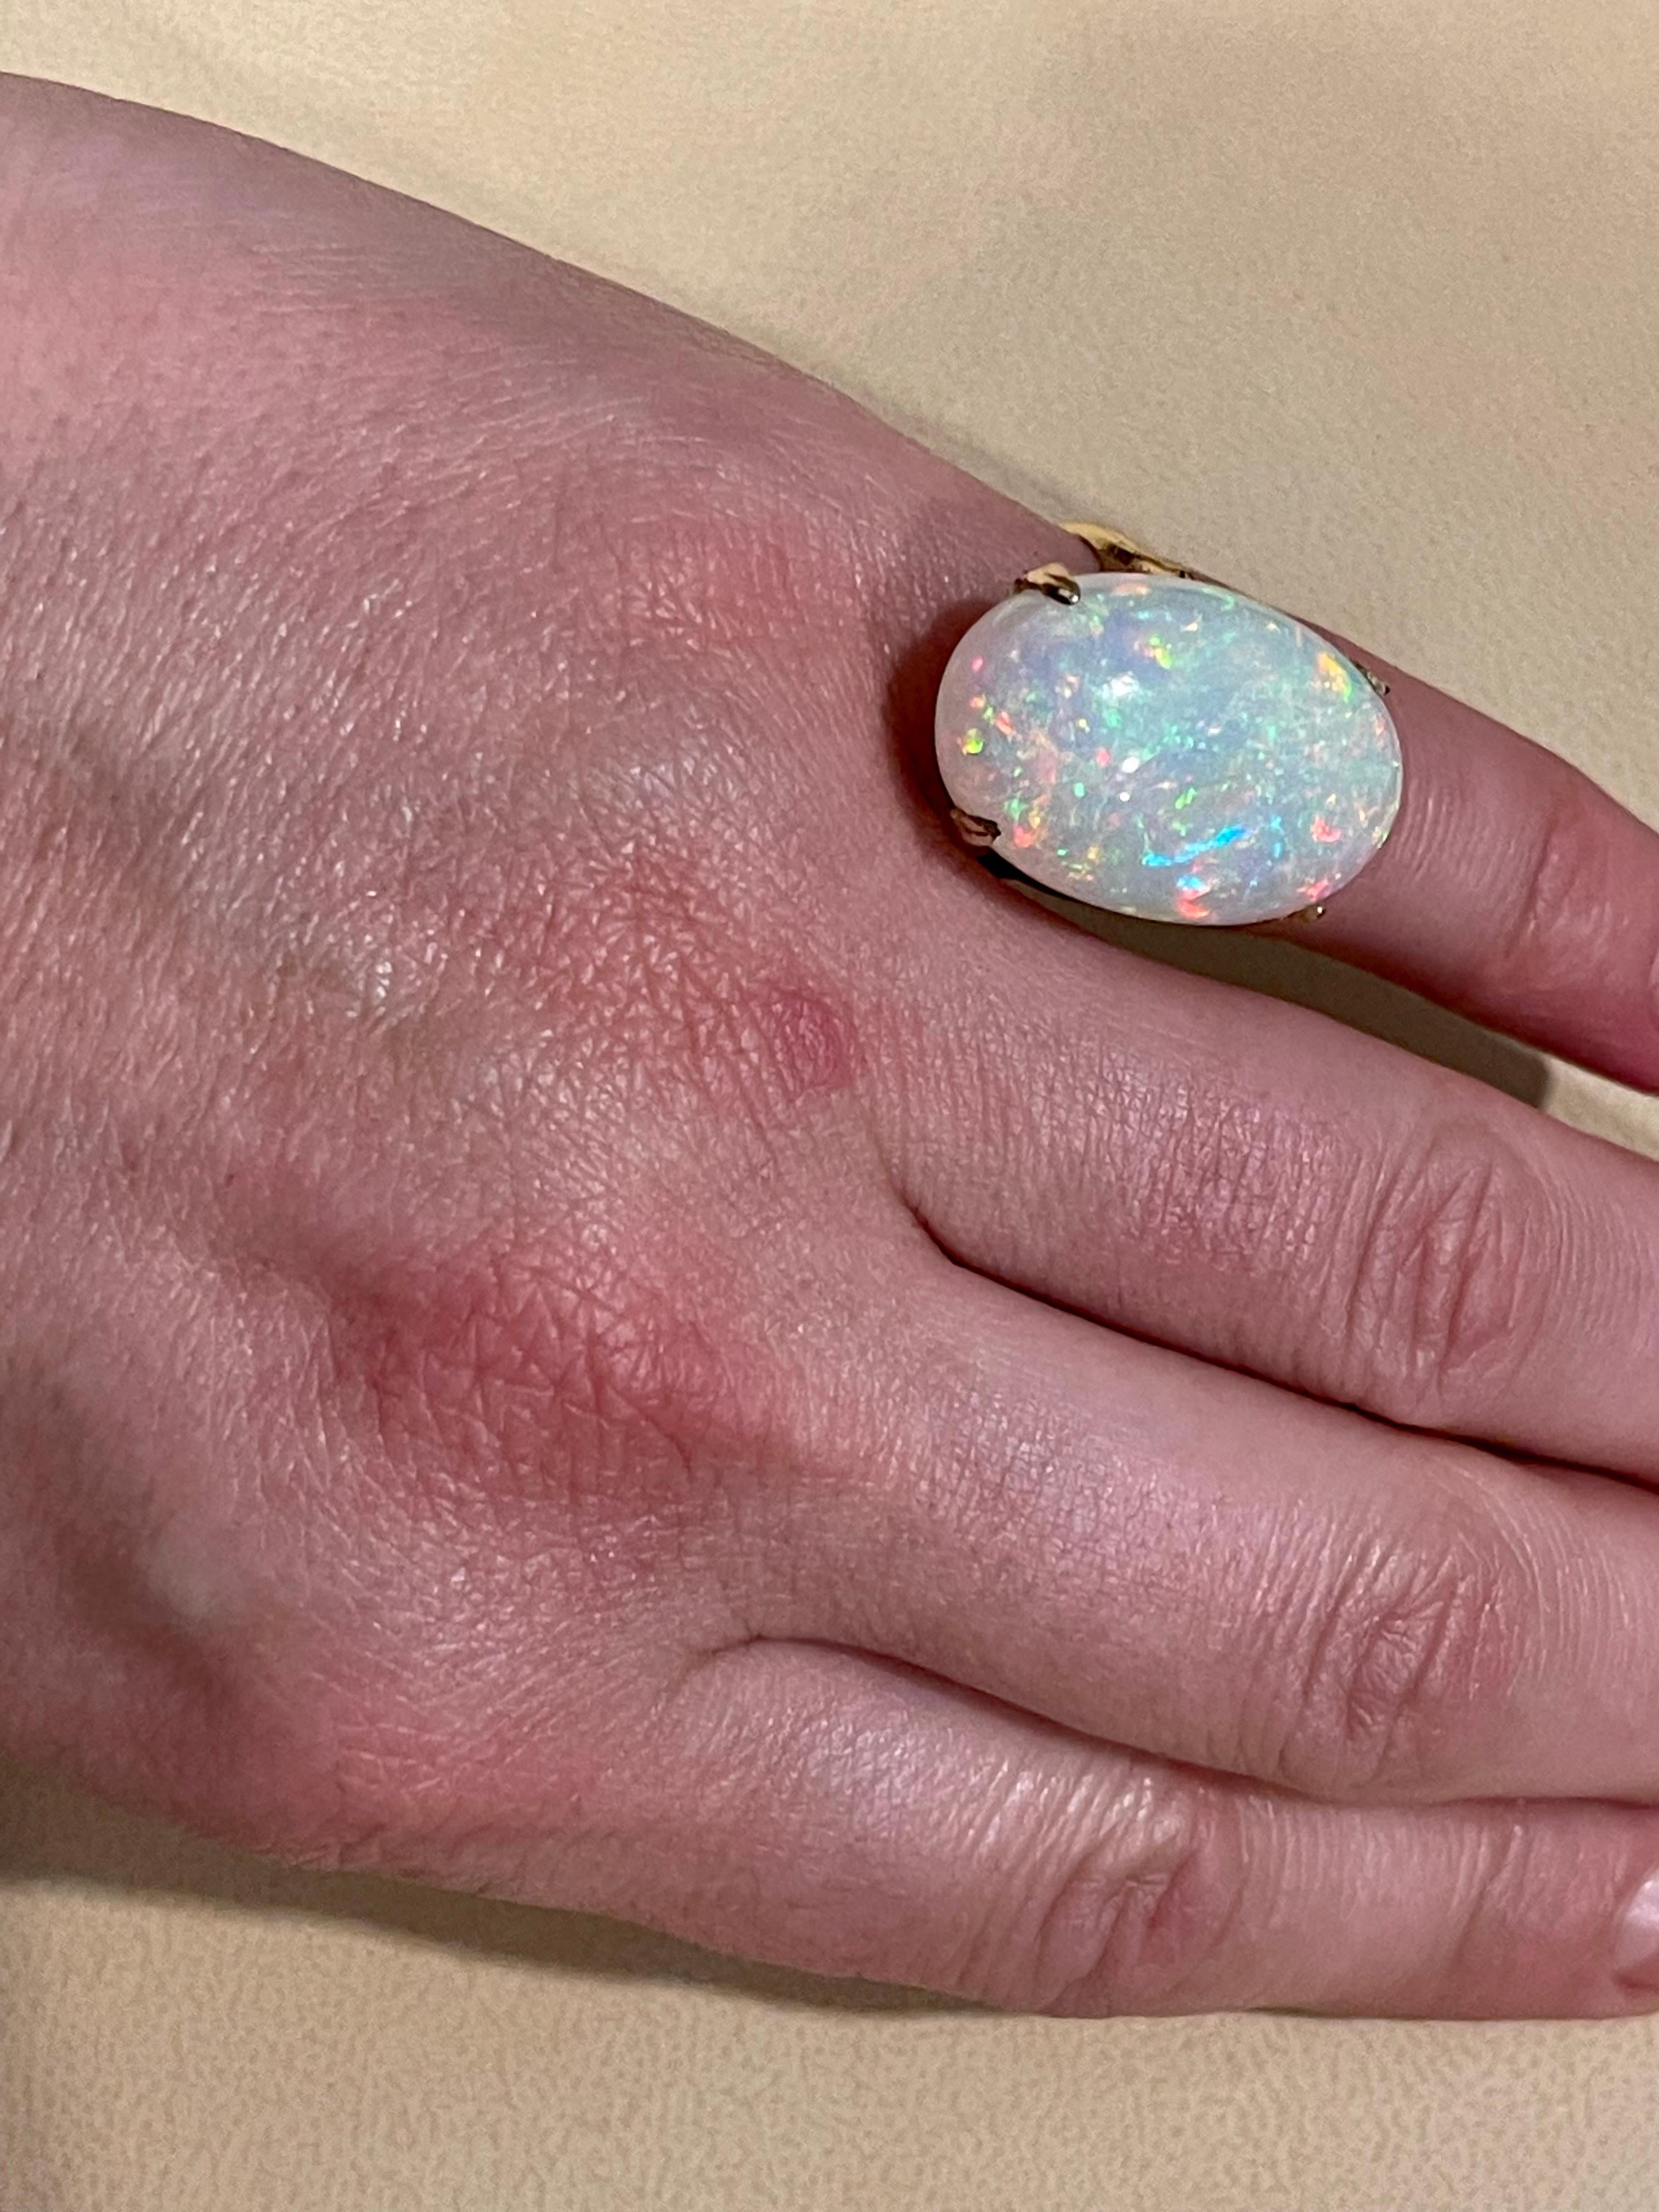 14 Carat Oval Shape Ethiopian Opal Cocktail Ring 14 Karat Yellow Gold For Sale 8